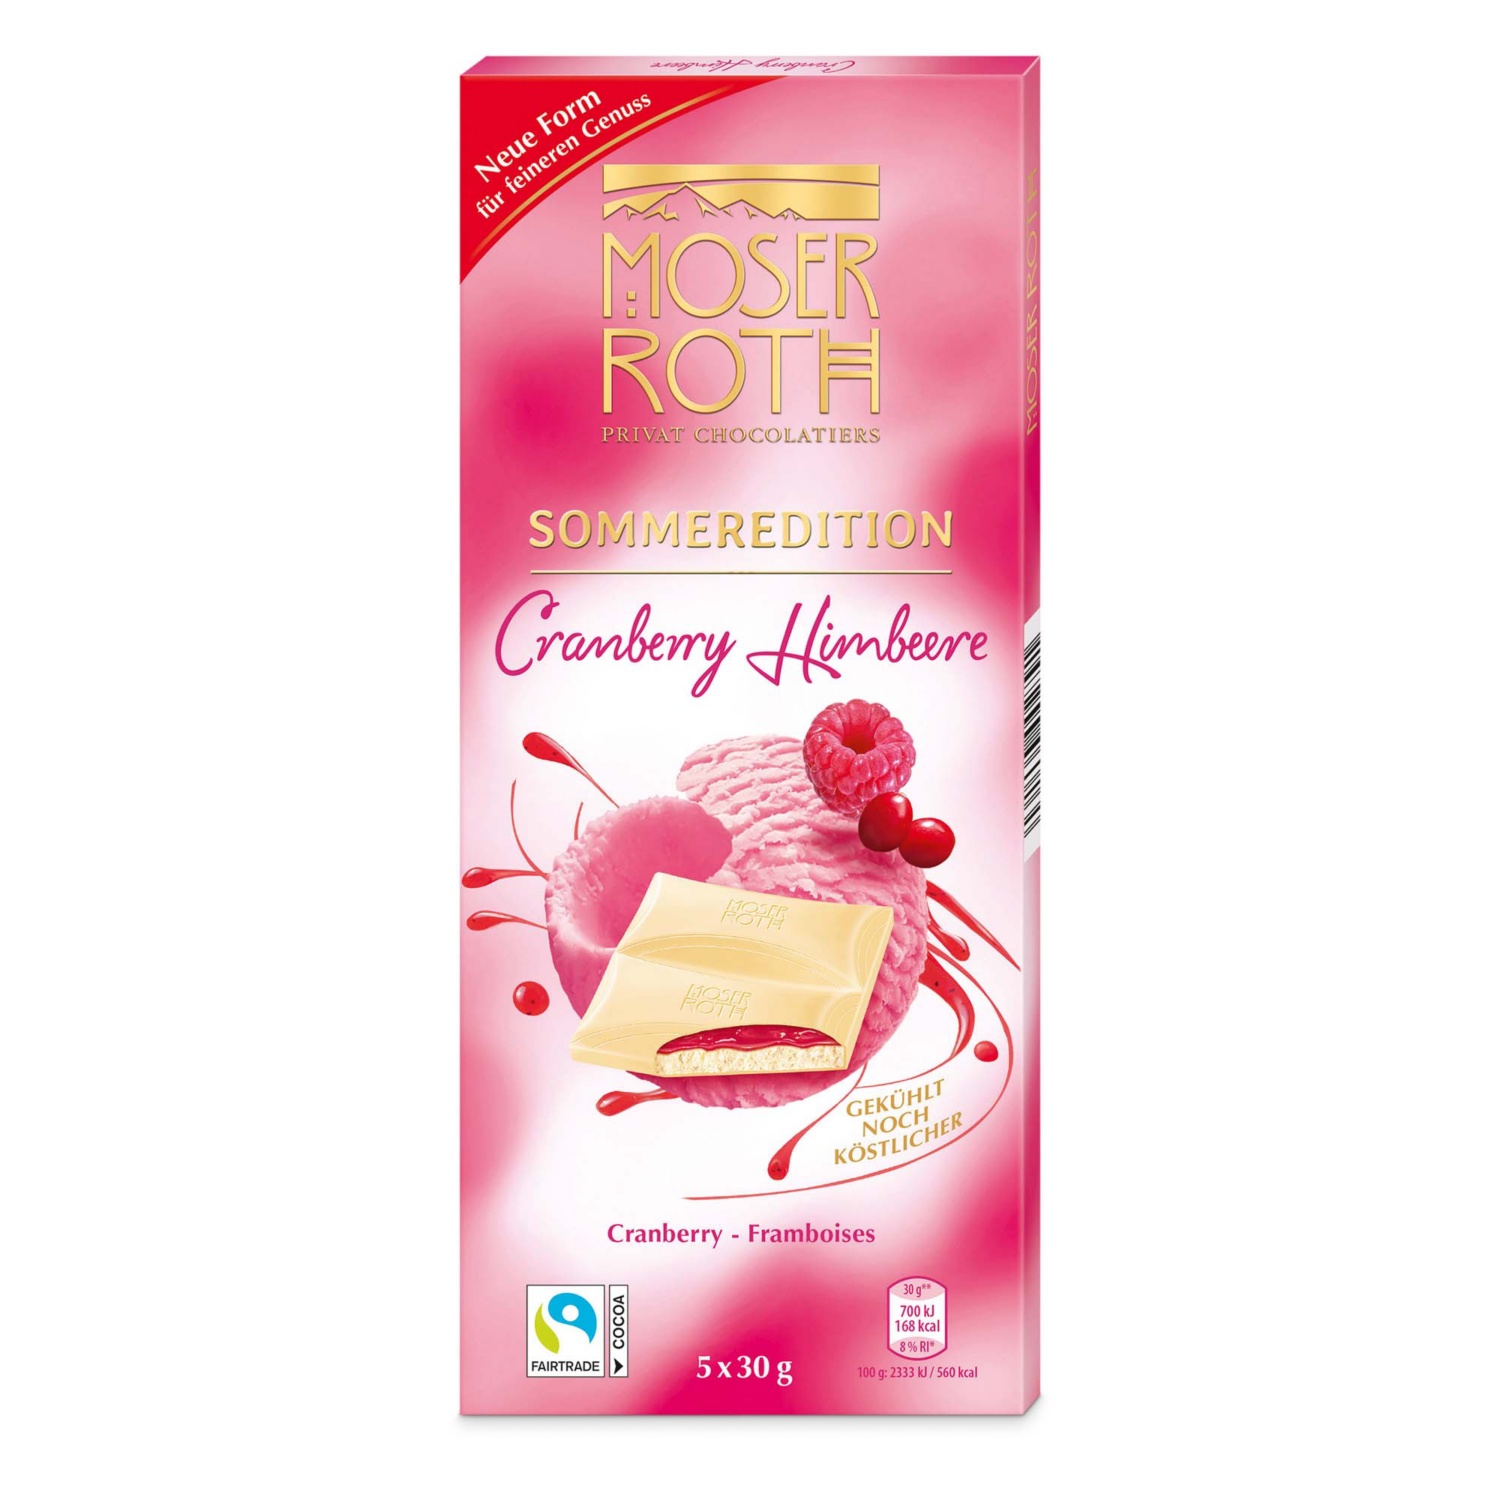 MOSER ROTH Sommerschokolade, Cranberry-Himbeere